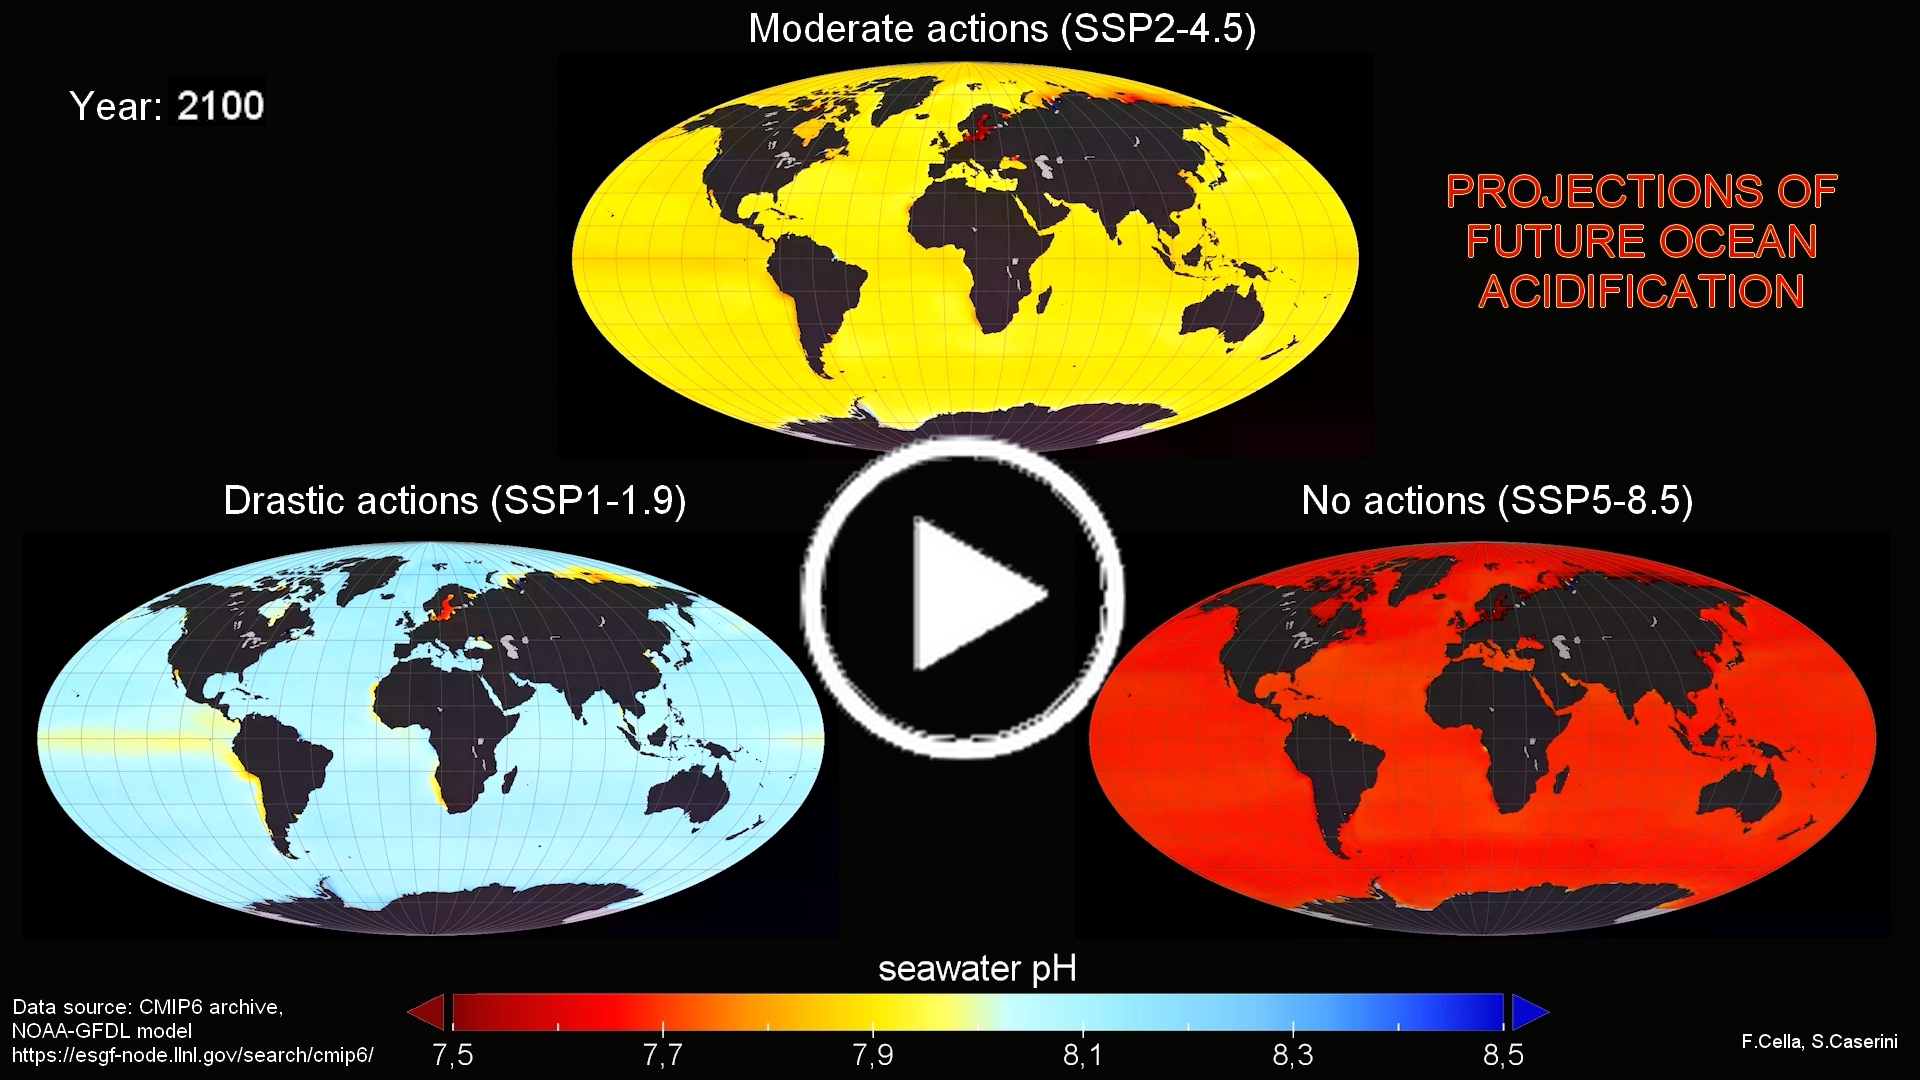 Projections of future ocean acidification